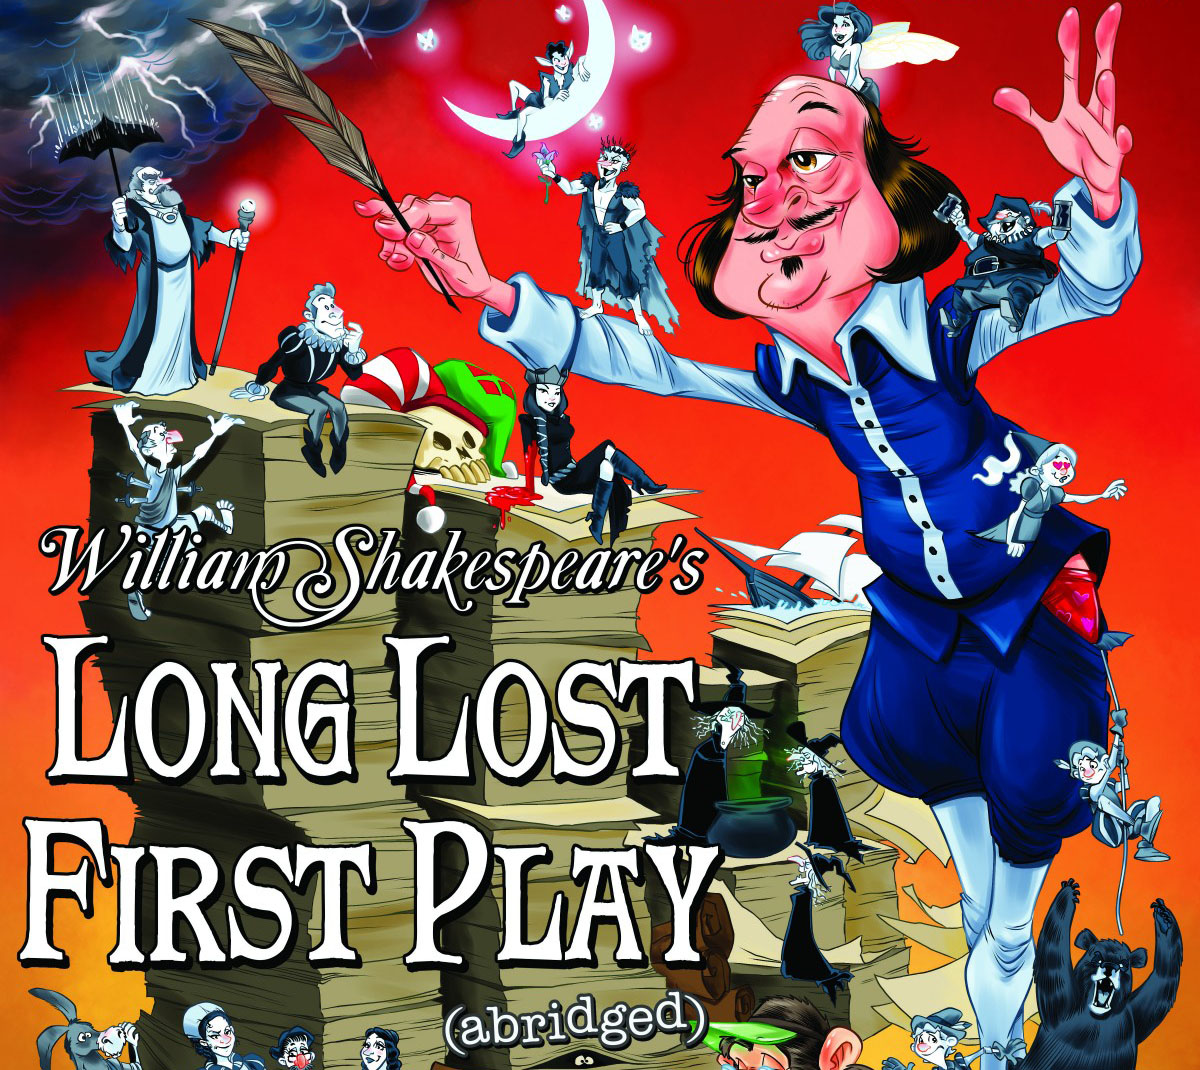 William Shakespeare’s LONG LOST FIRST PLAY (Abridged) at Oxford Playhouse